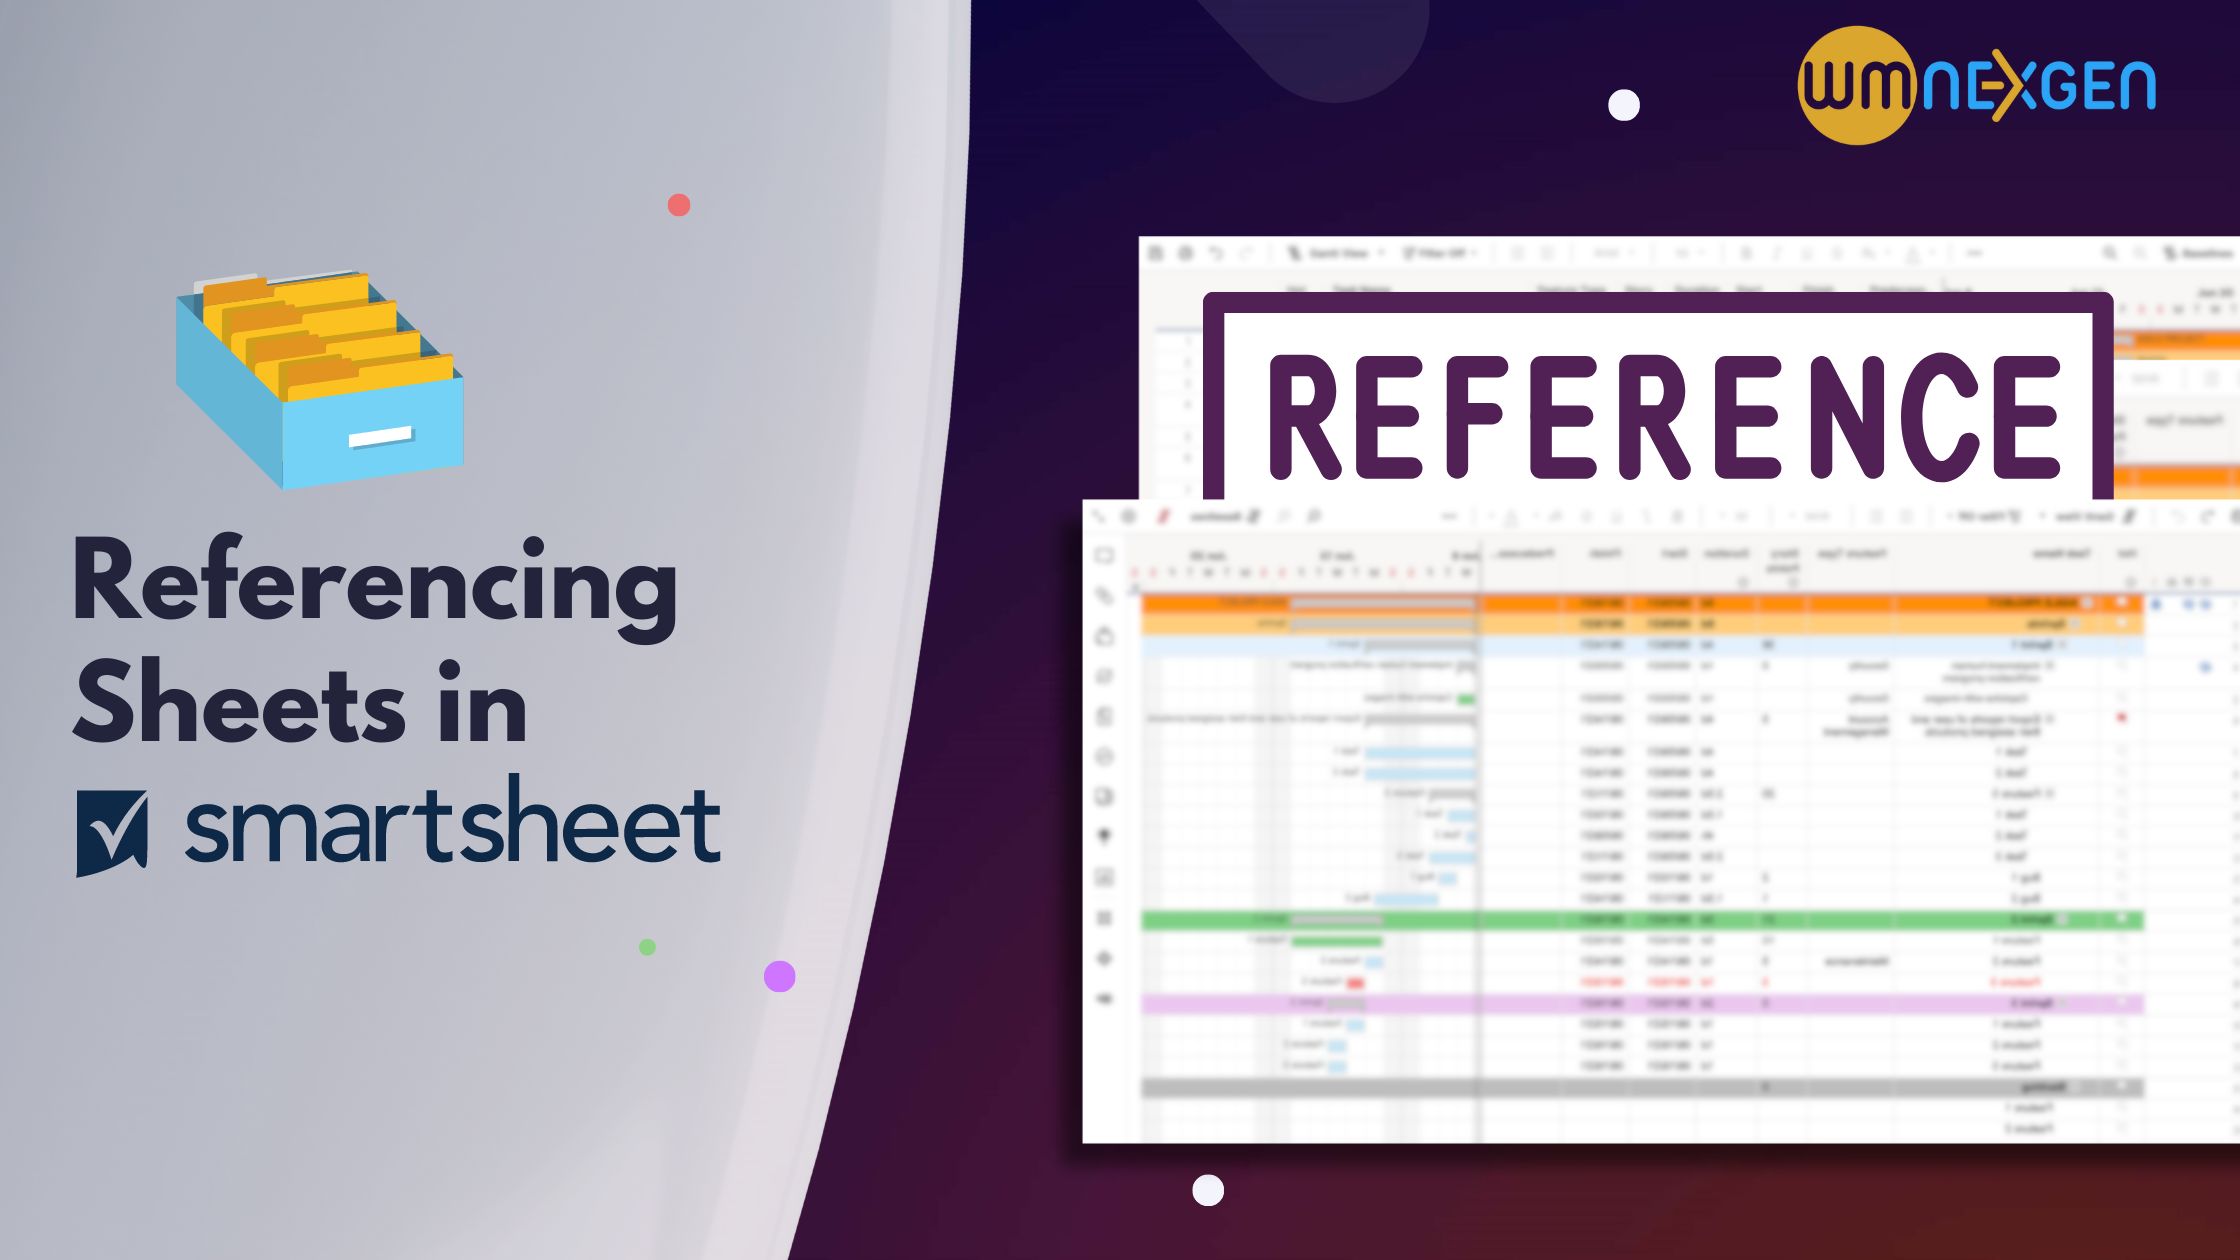 Referencing sheets in smartsheet : A Quick Guide